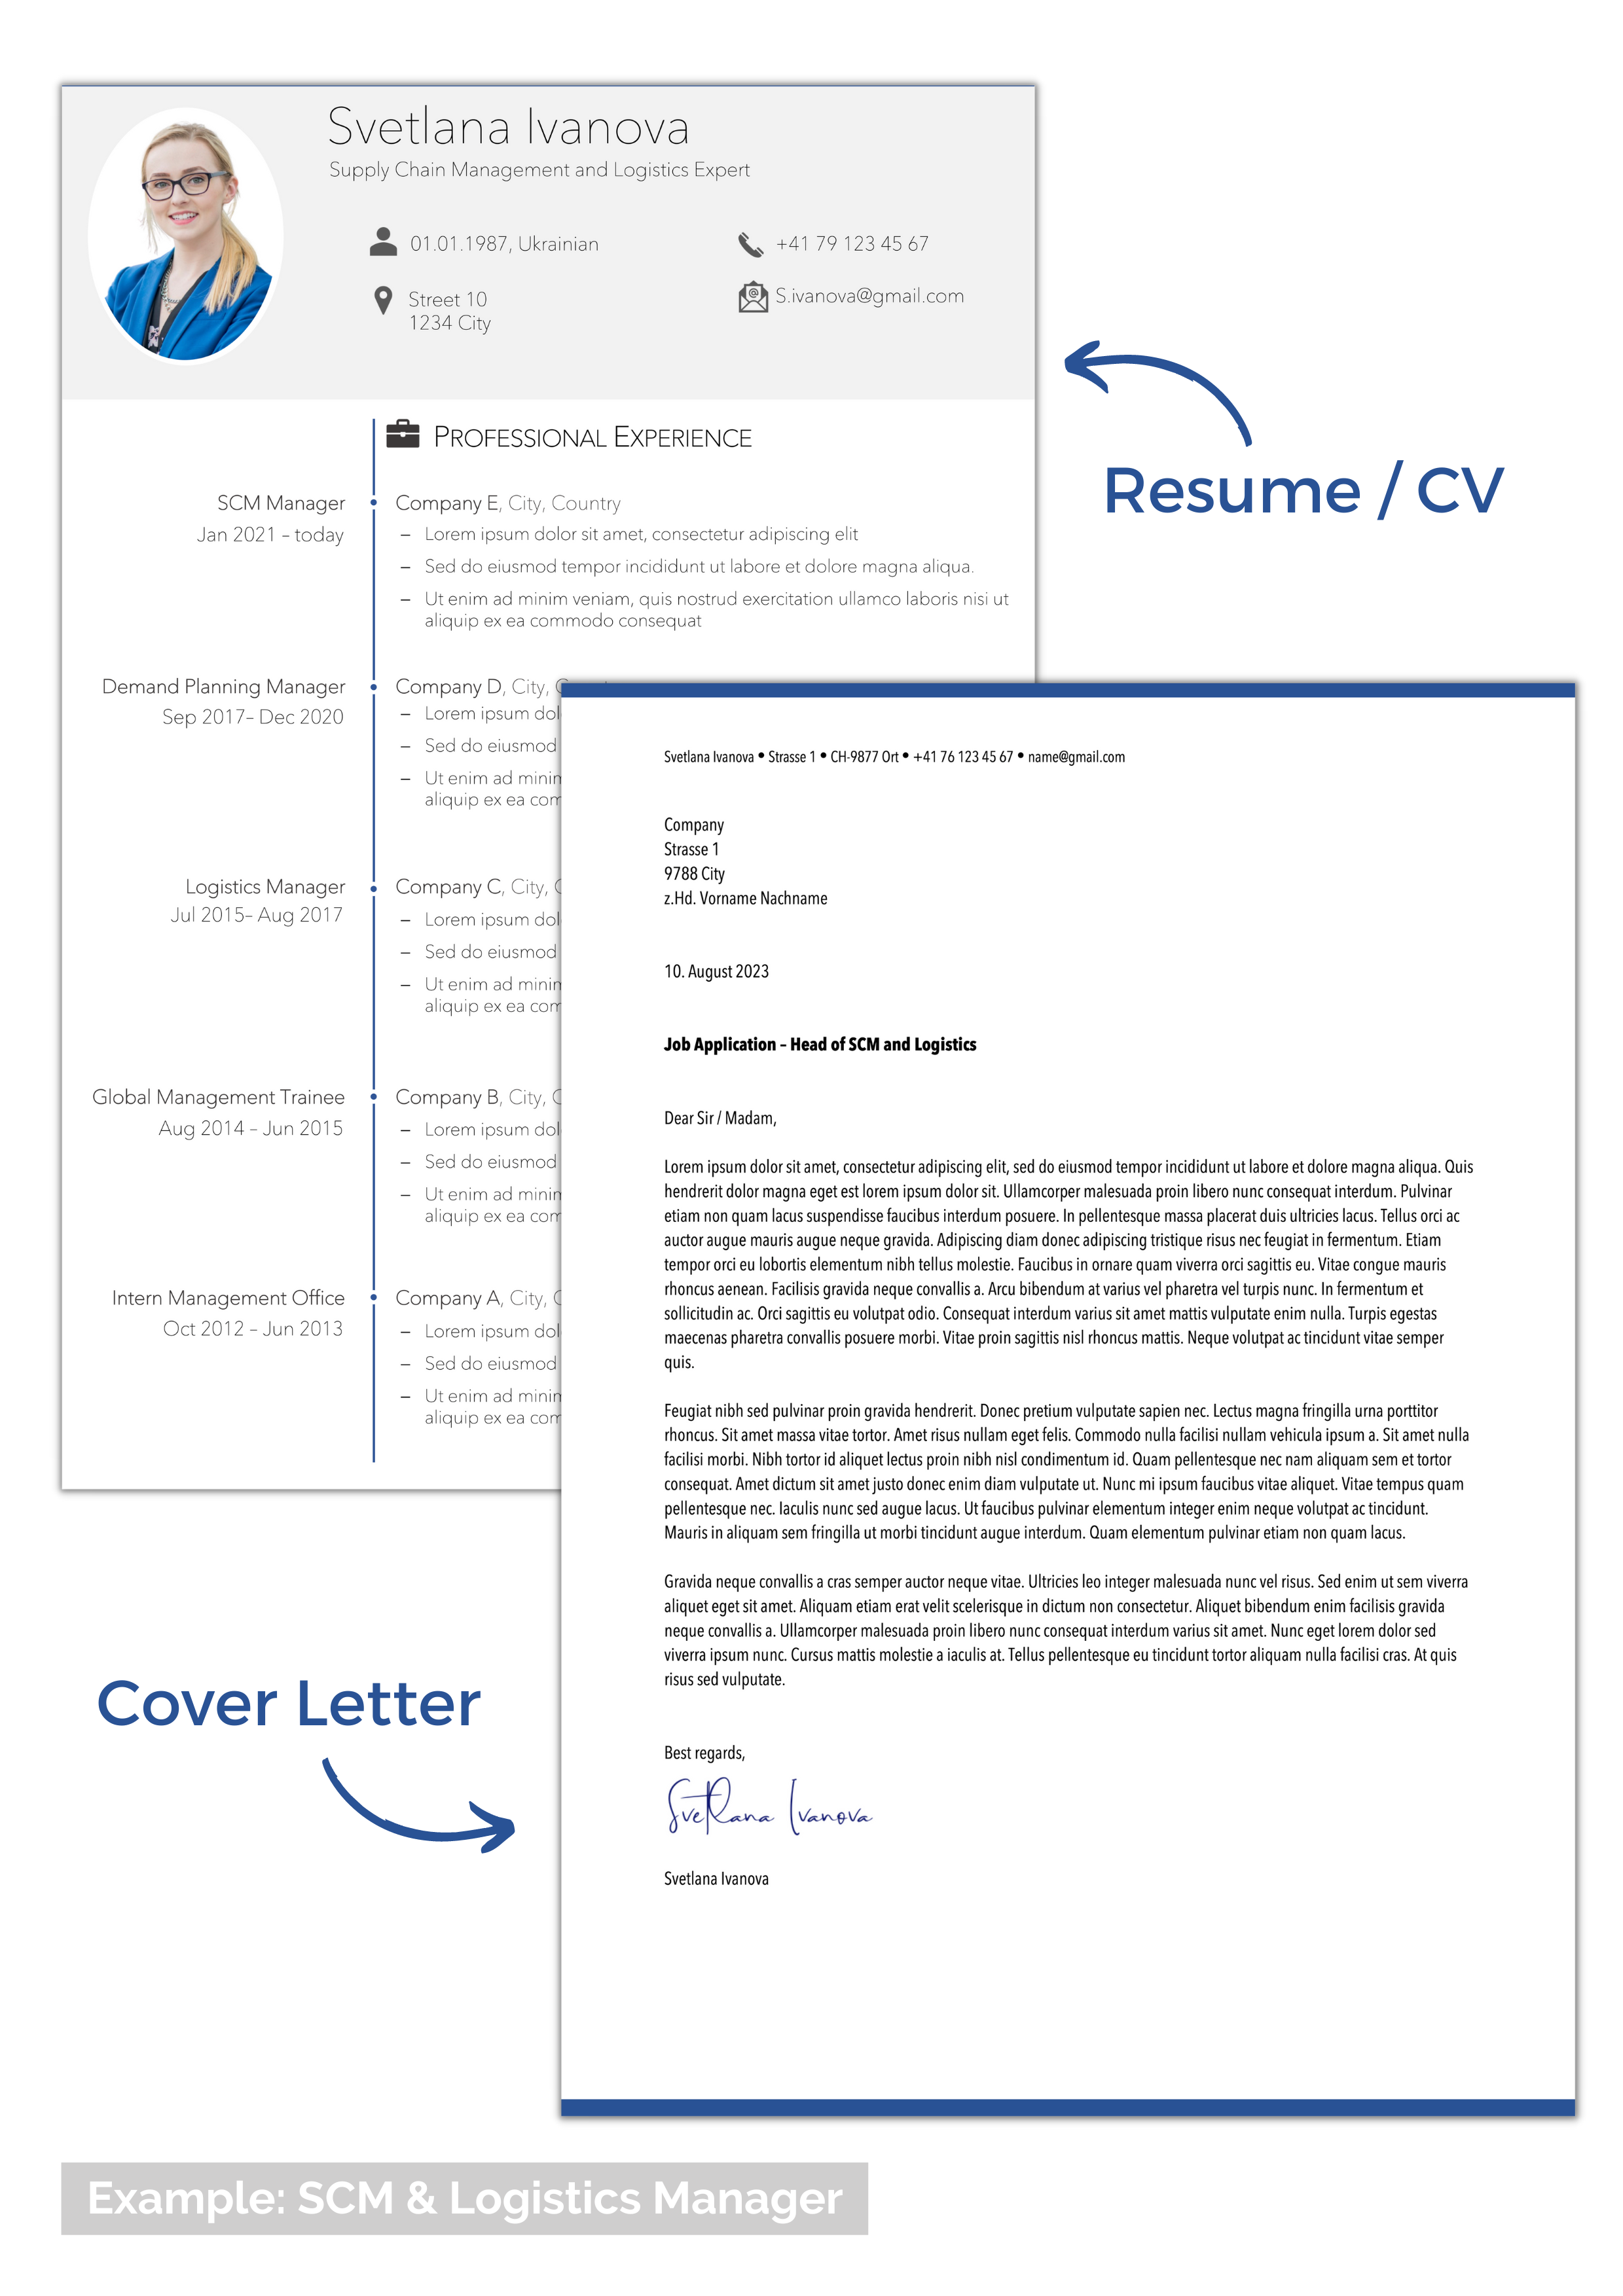 sample swiss job application resume and cover letter for logistics manager